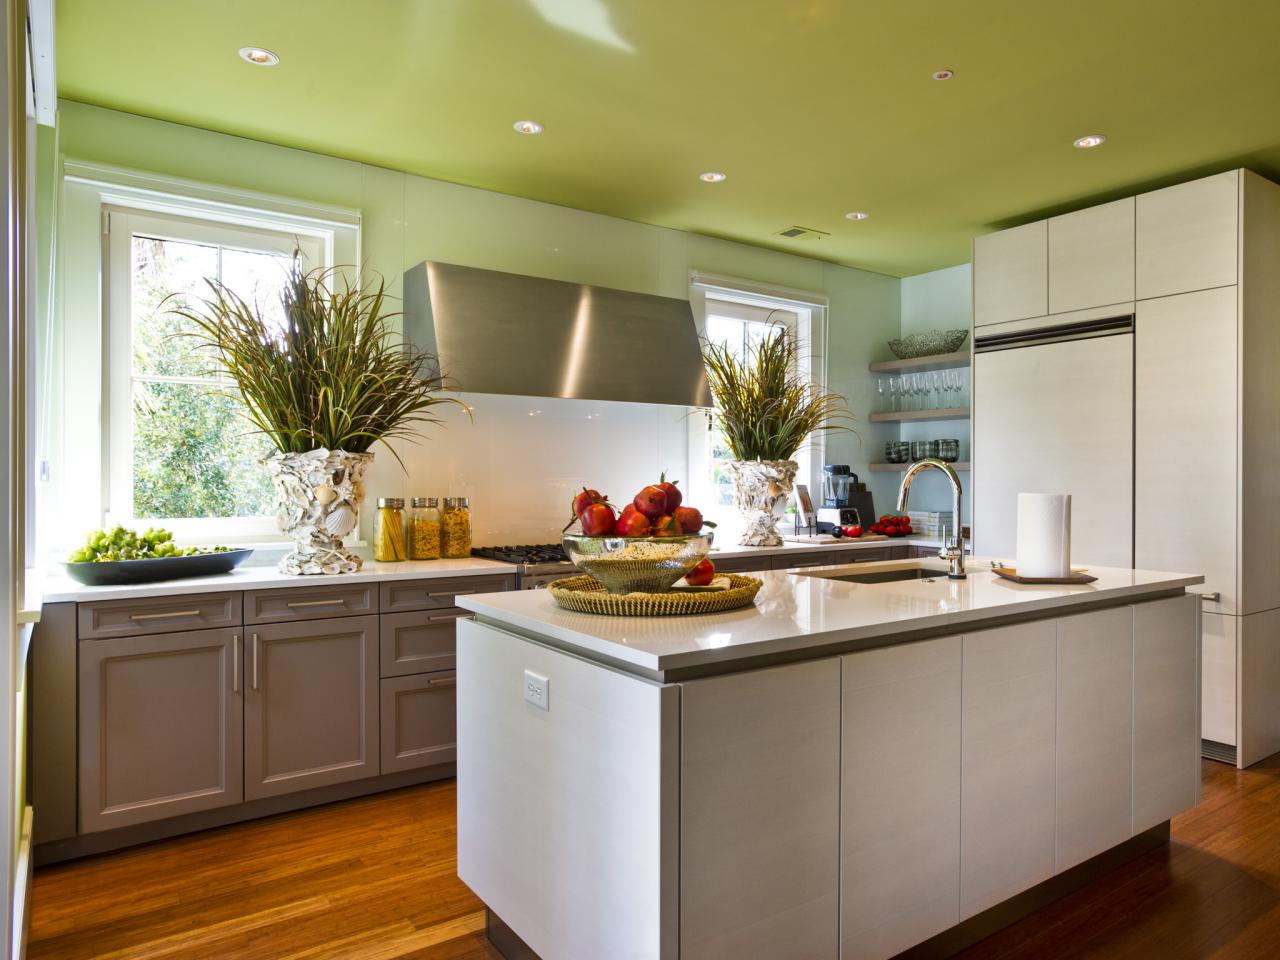 Kitchen Cabinet Styles Pictures, Ideas & Tips From HGTV   HGTV